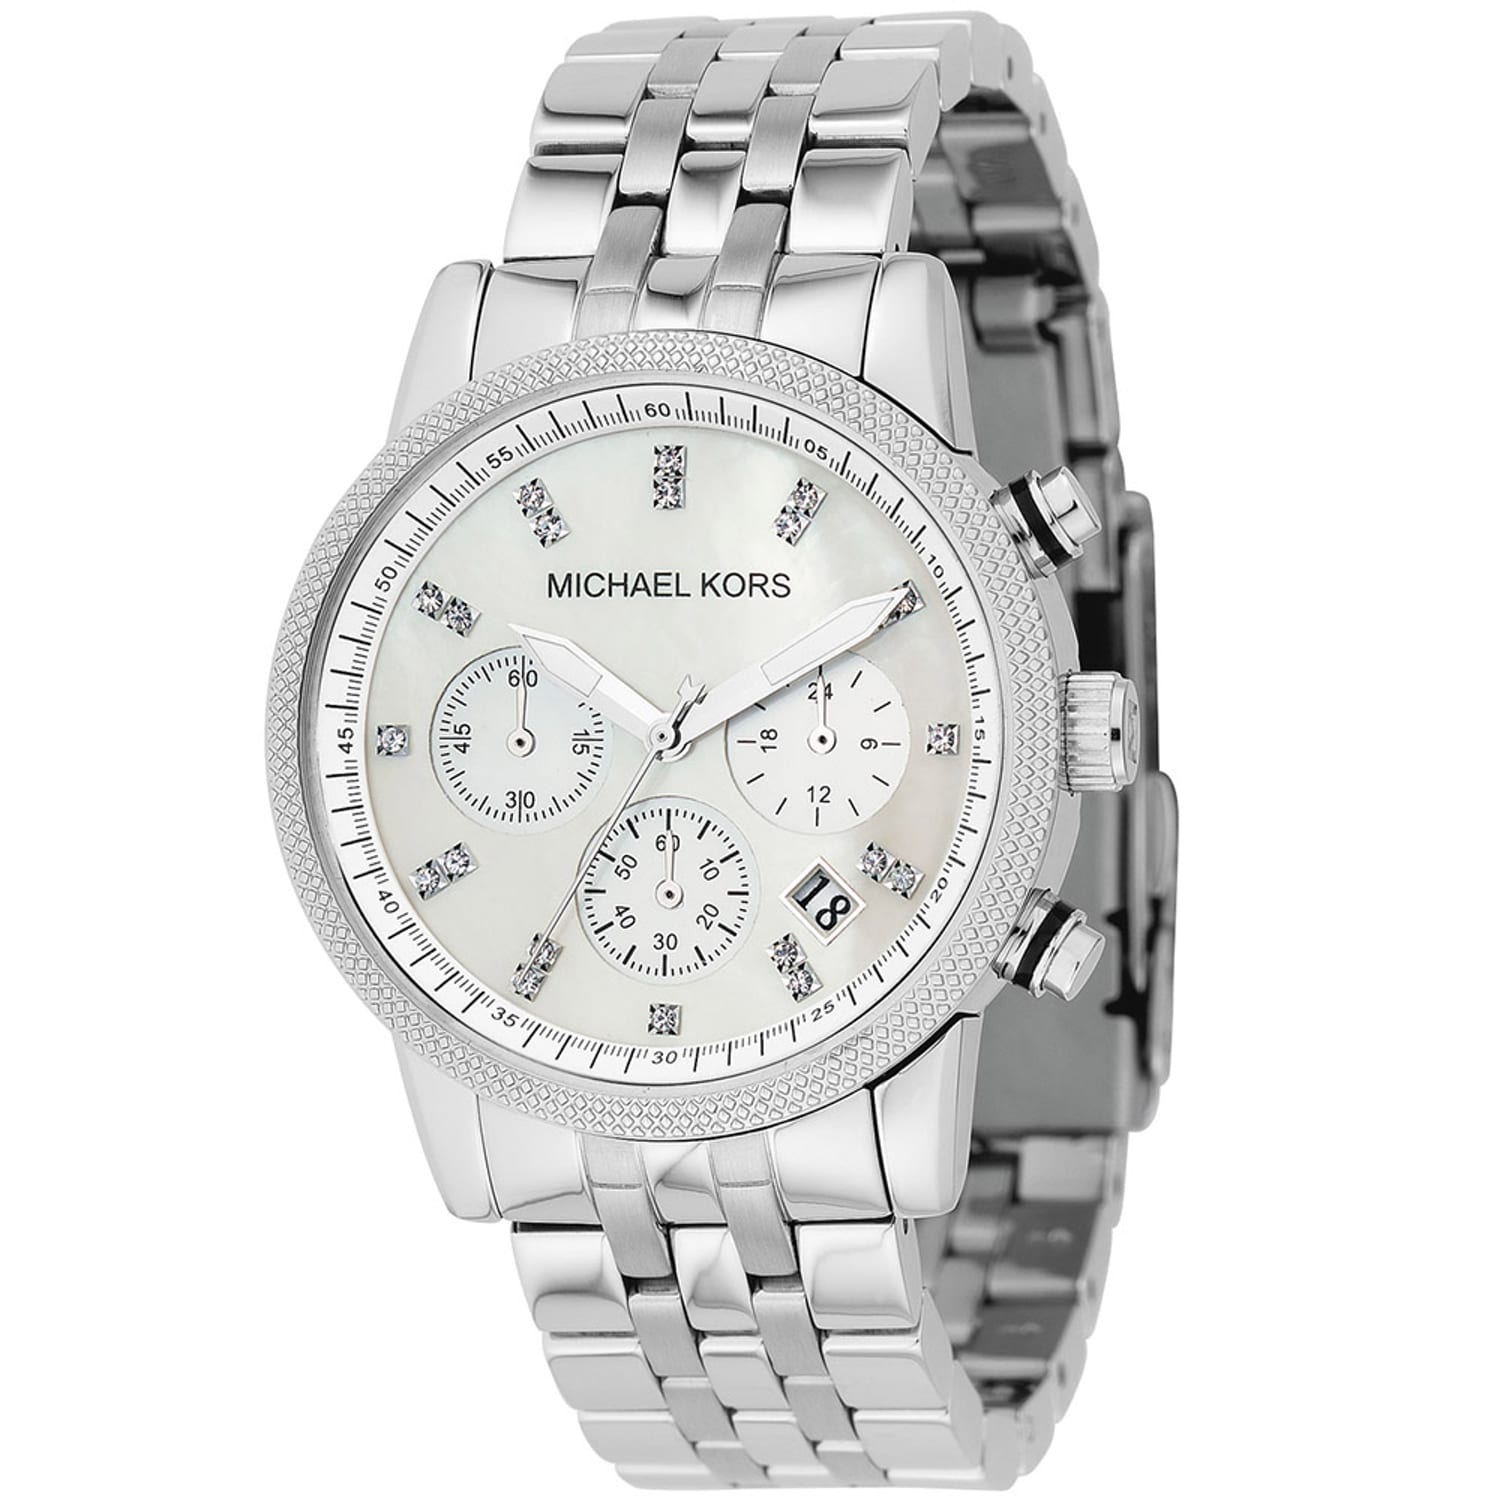 Michael Kors MK5020 Mother of Pearl Chronograph Steel Watch - silver Overstock - 5084190